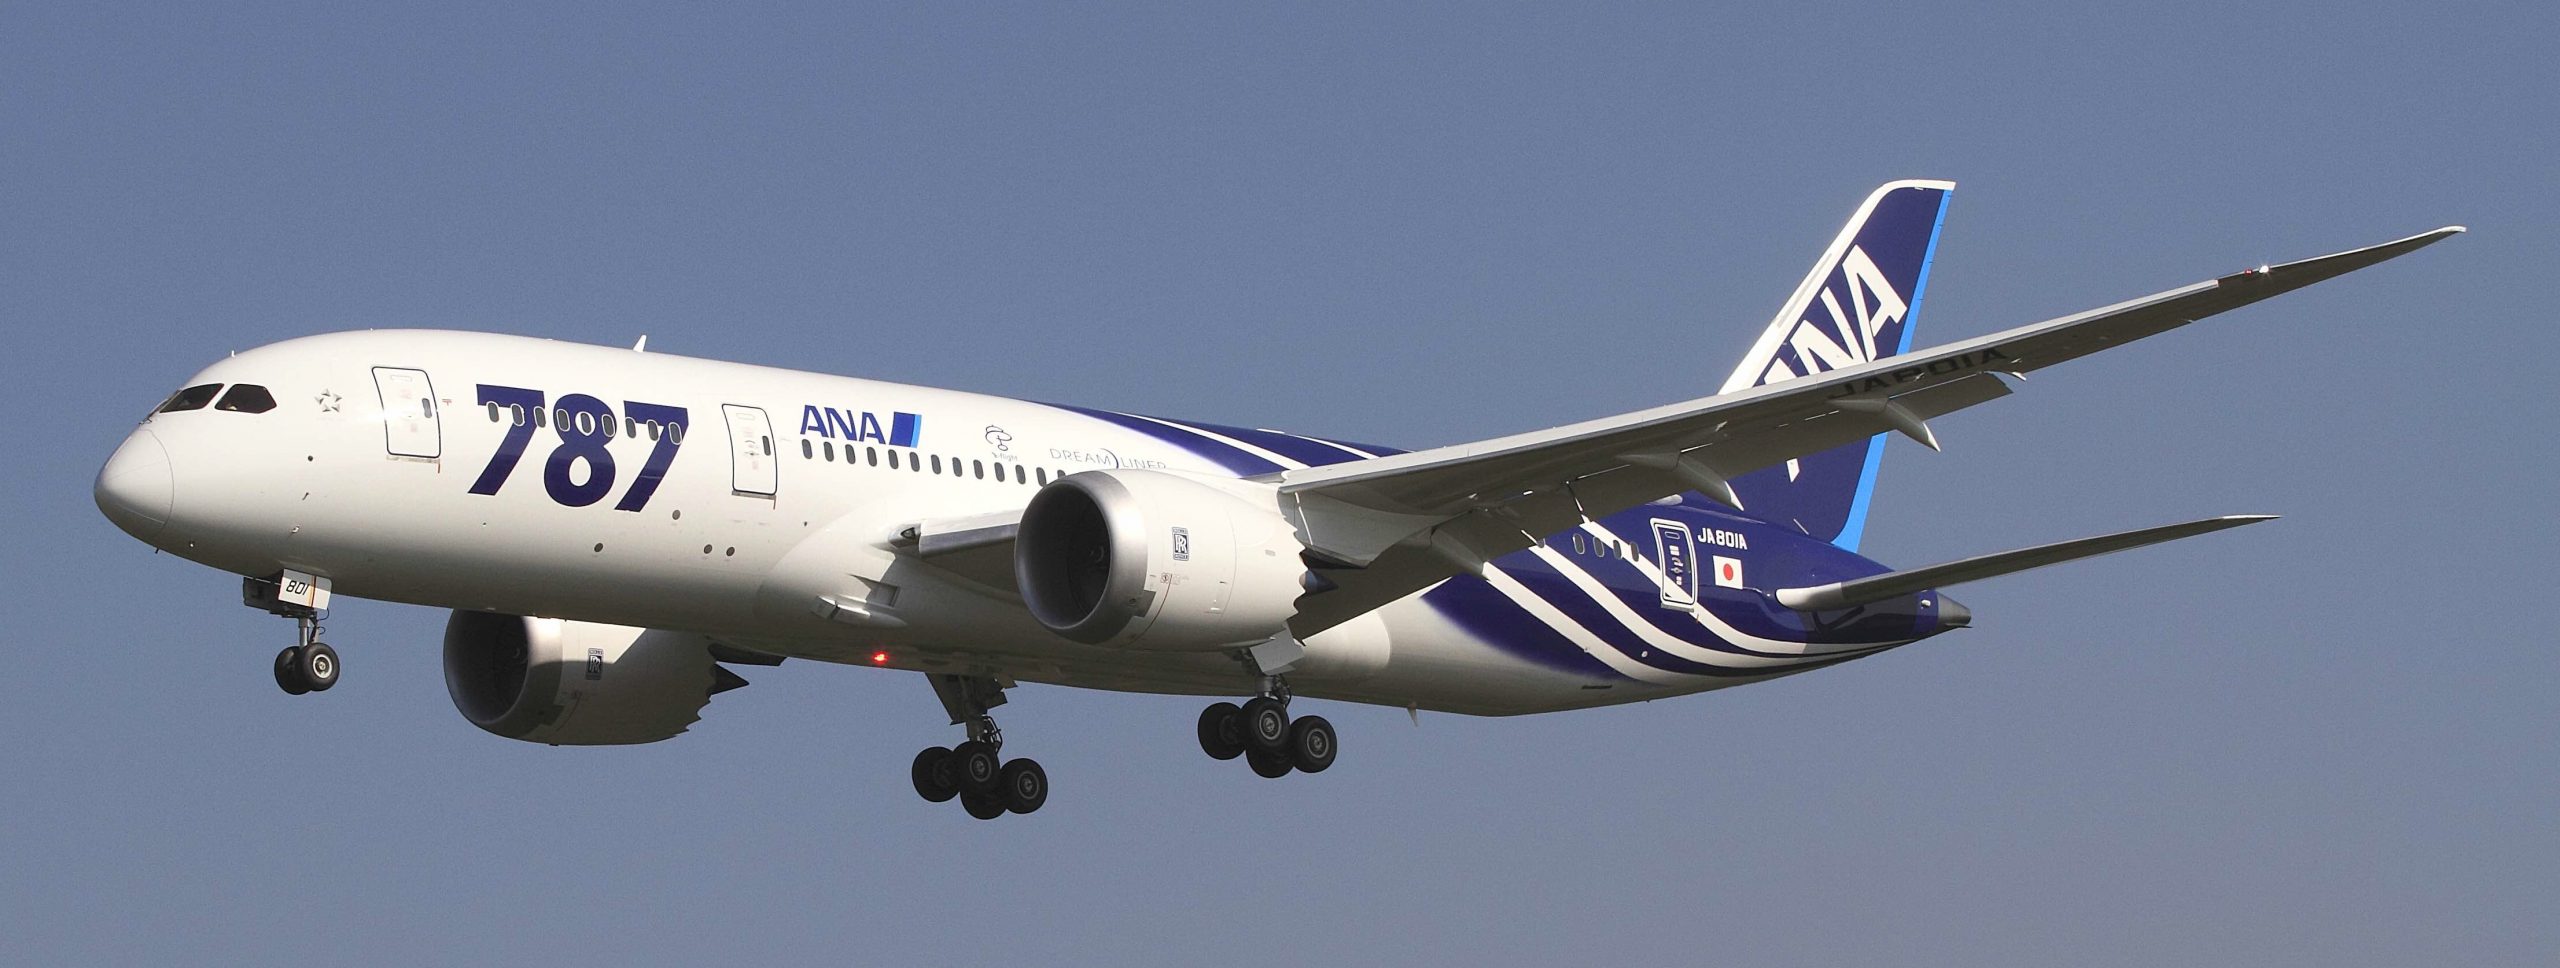 A photograph of an airplane mid-flight on a blue sky background. 787 ANA is written on the fuselage.